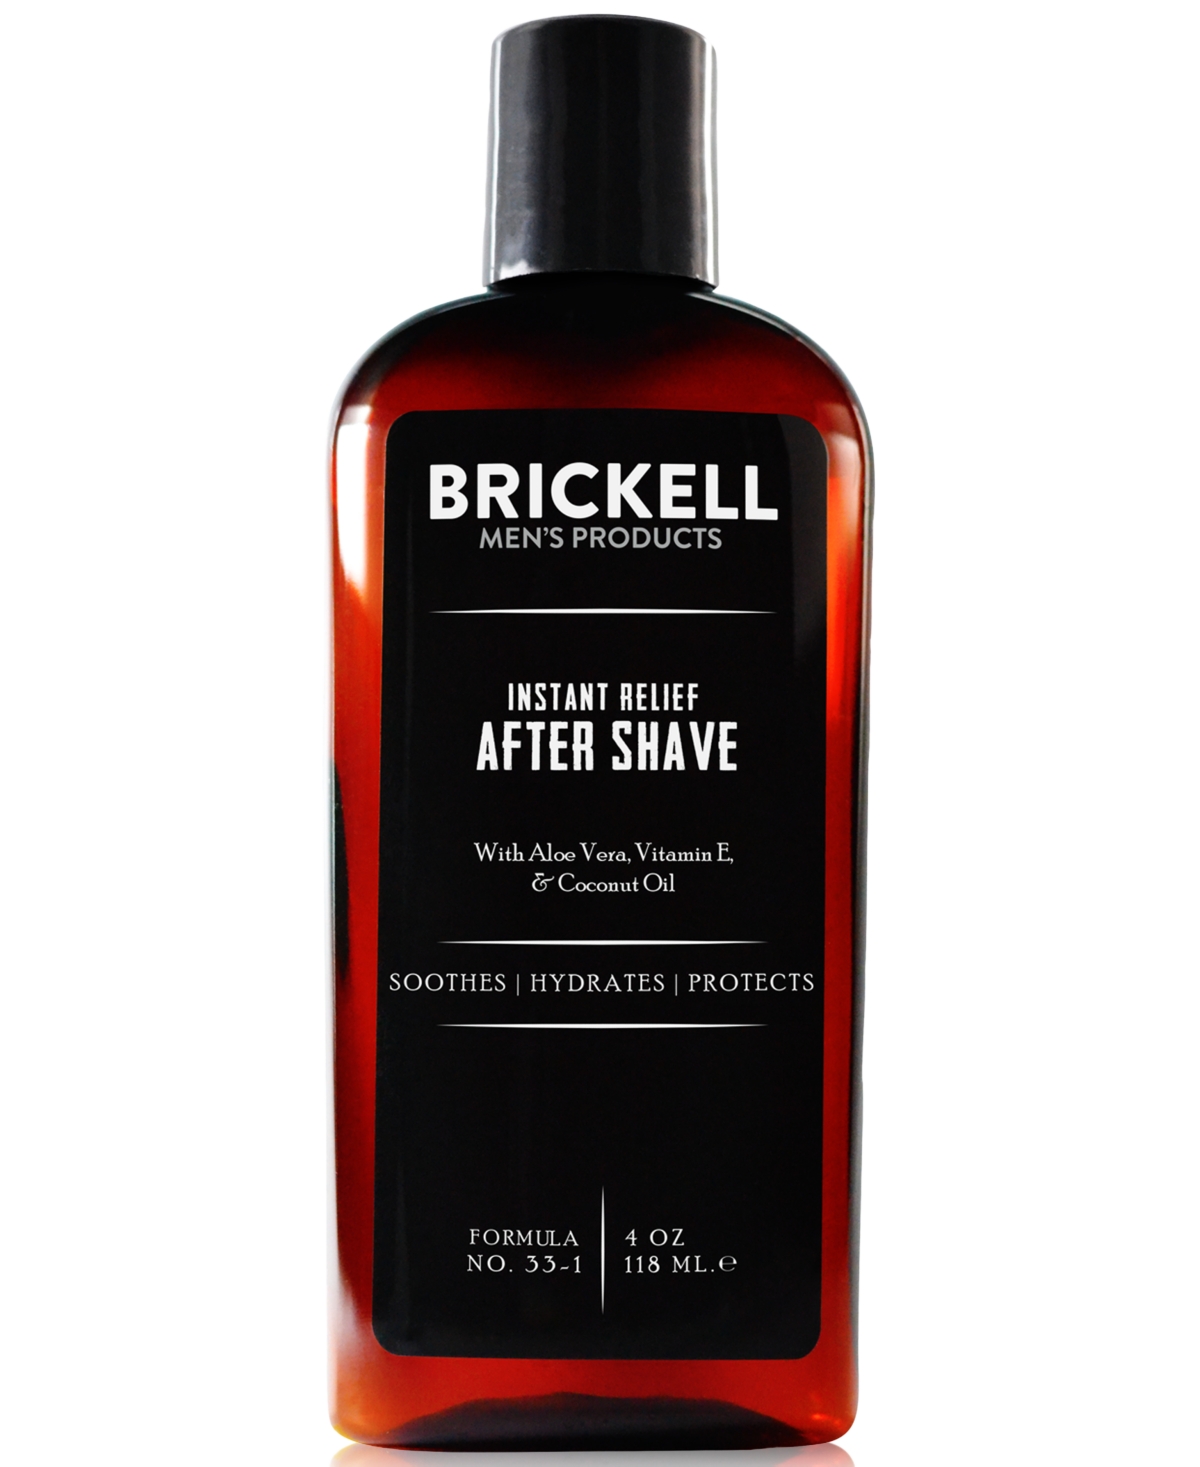 Brickell Mens Products Brickell Men's Products Instant Relief After Shave, 4 Oz.